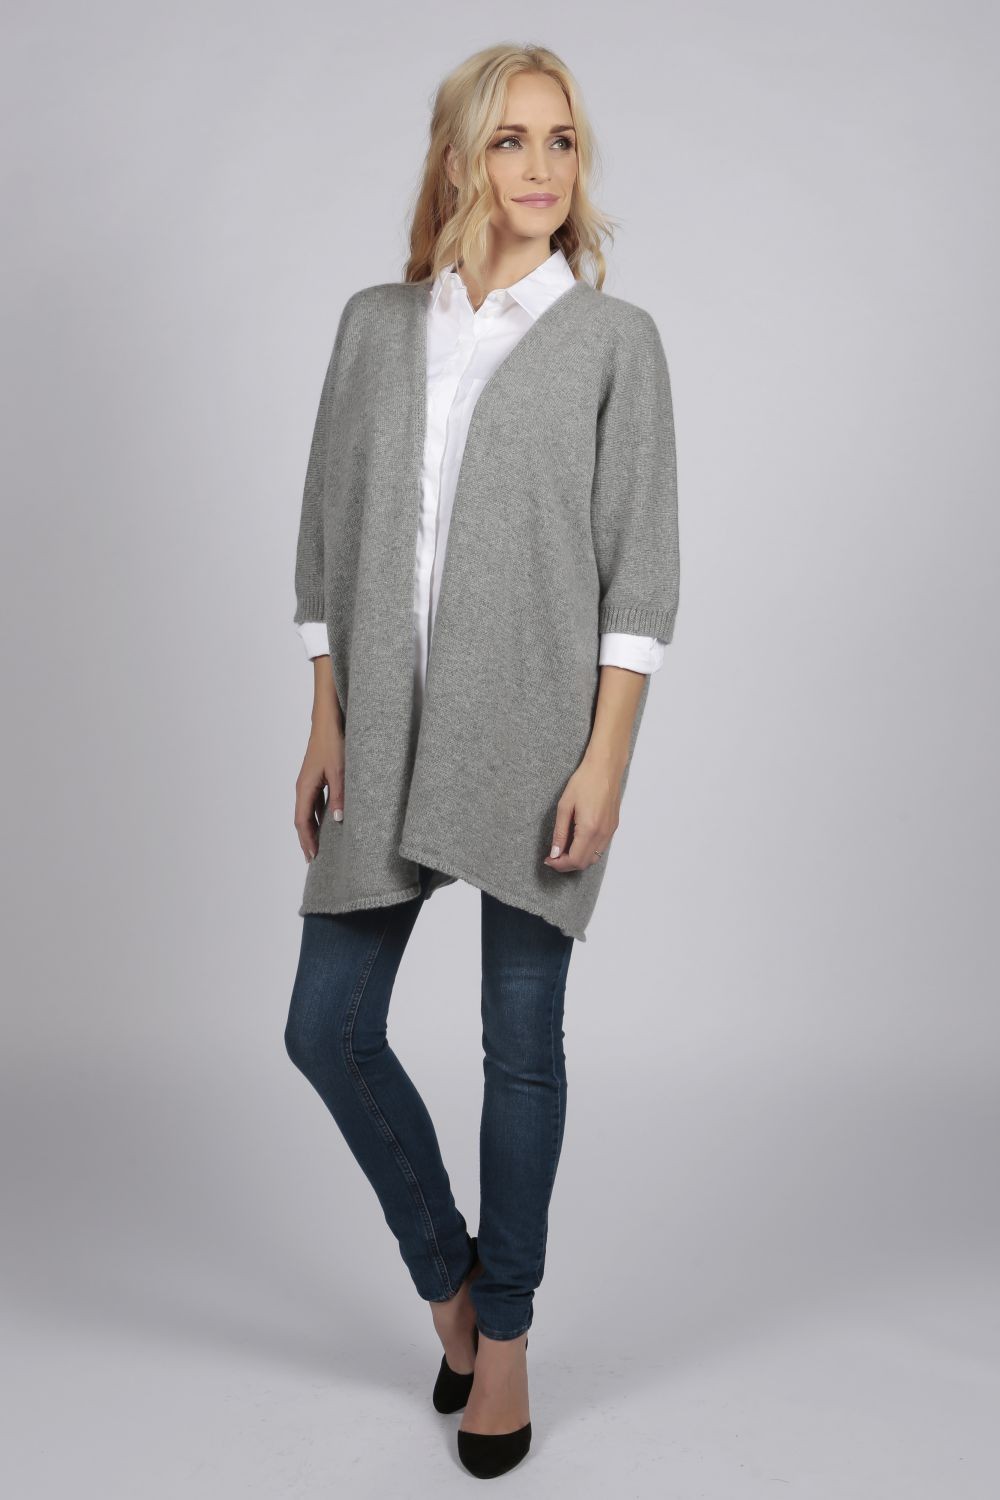 Light grey pure cashmere duster cardigan | Italy in Cashmere US